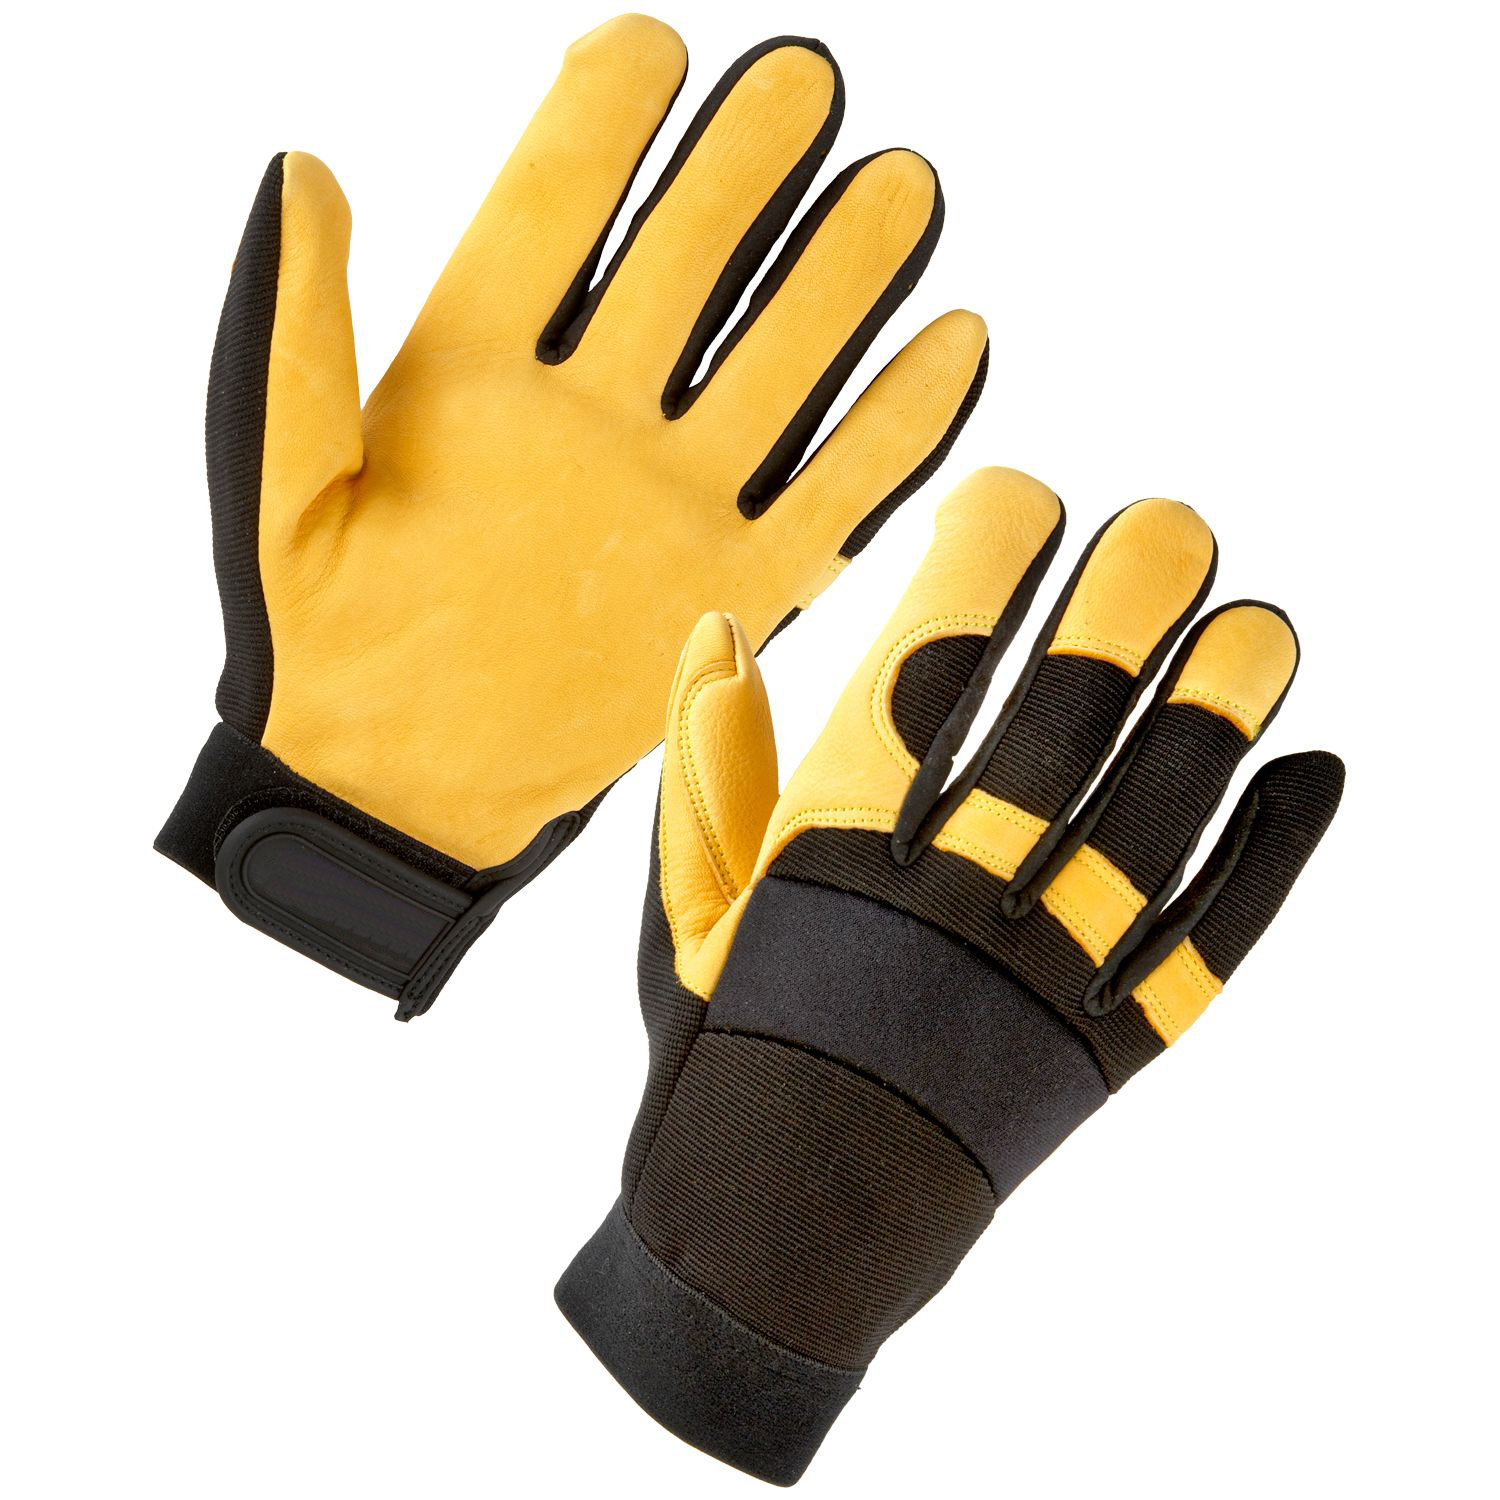 Luxurious Comfortable Leather Mechanic Gloves with Nylon Back